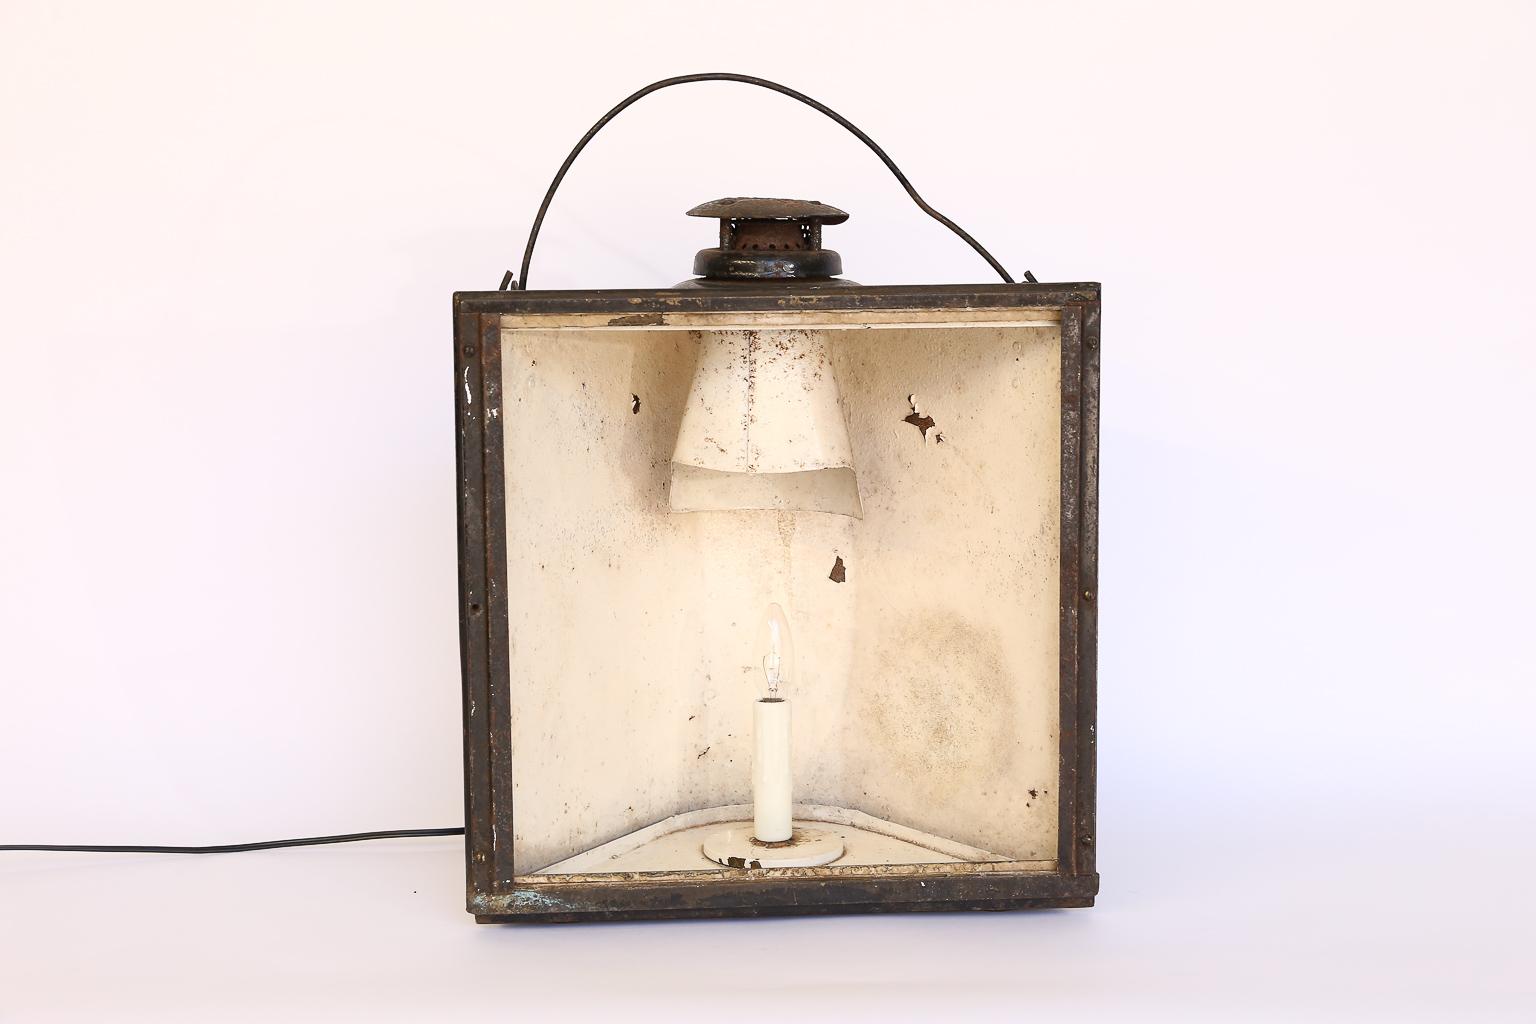 We've converted this antique Adams and Westlake non sweating lantern from Chicago into an electric lamp with new wiring. Adlake is best known as manufacturers of an array of transportation accessories, primarily for the railroads. The steel lantern